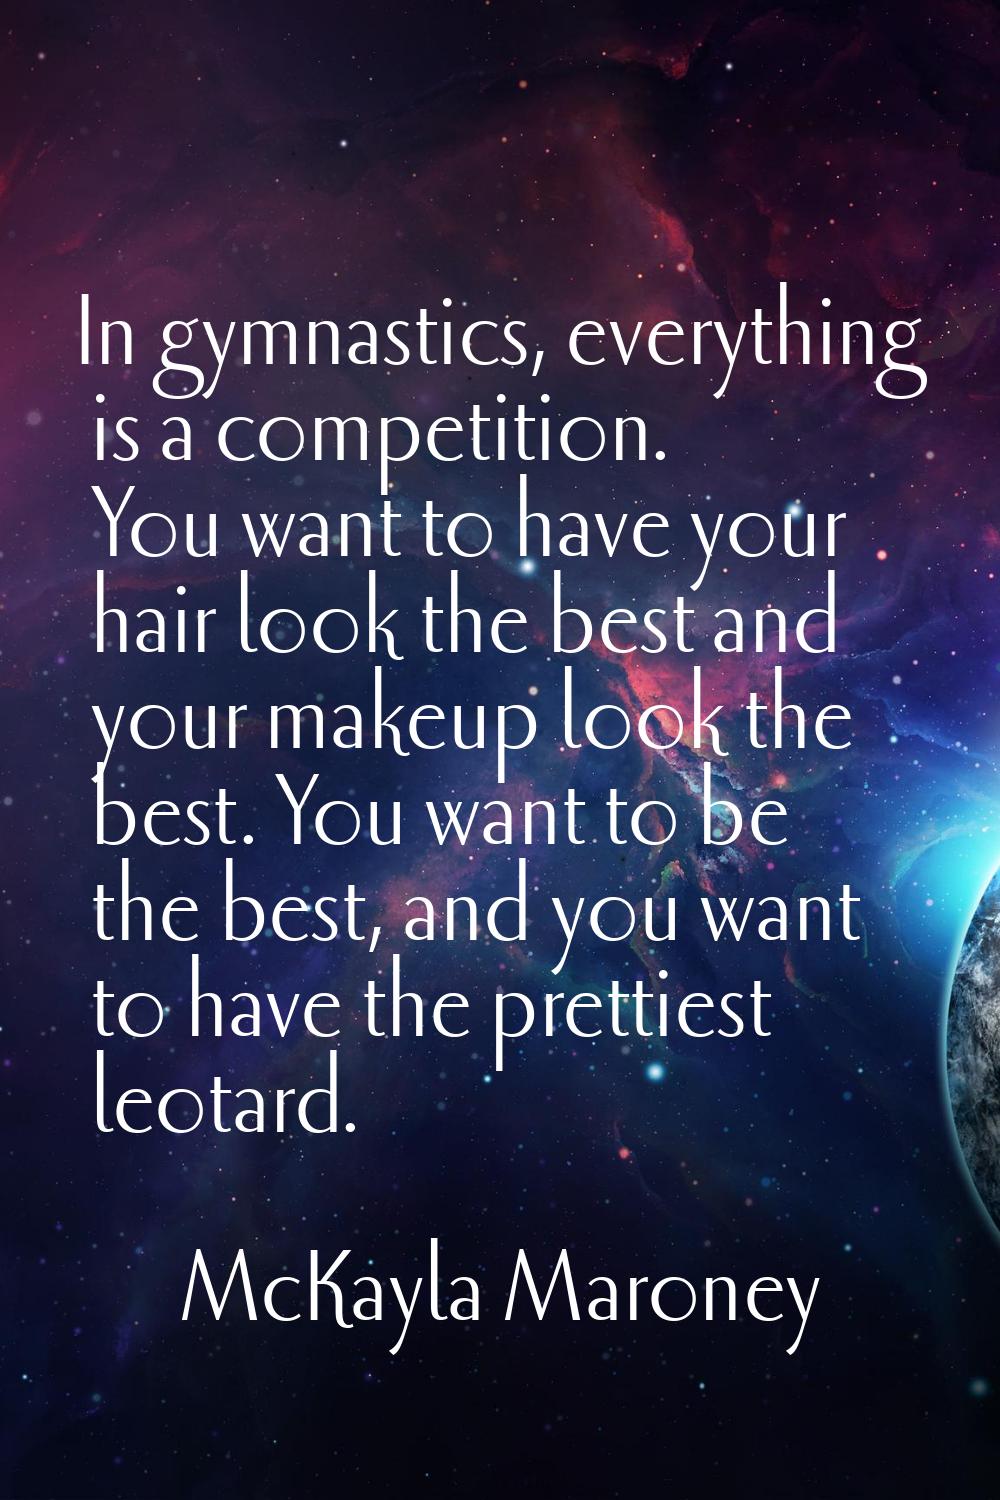 In gymnastics, everything is a competition. You want to have your hair look the best and your makeu